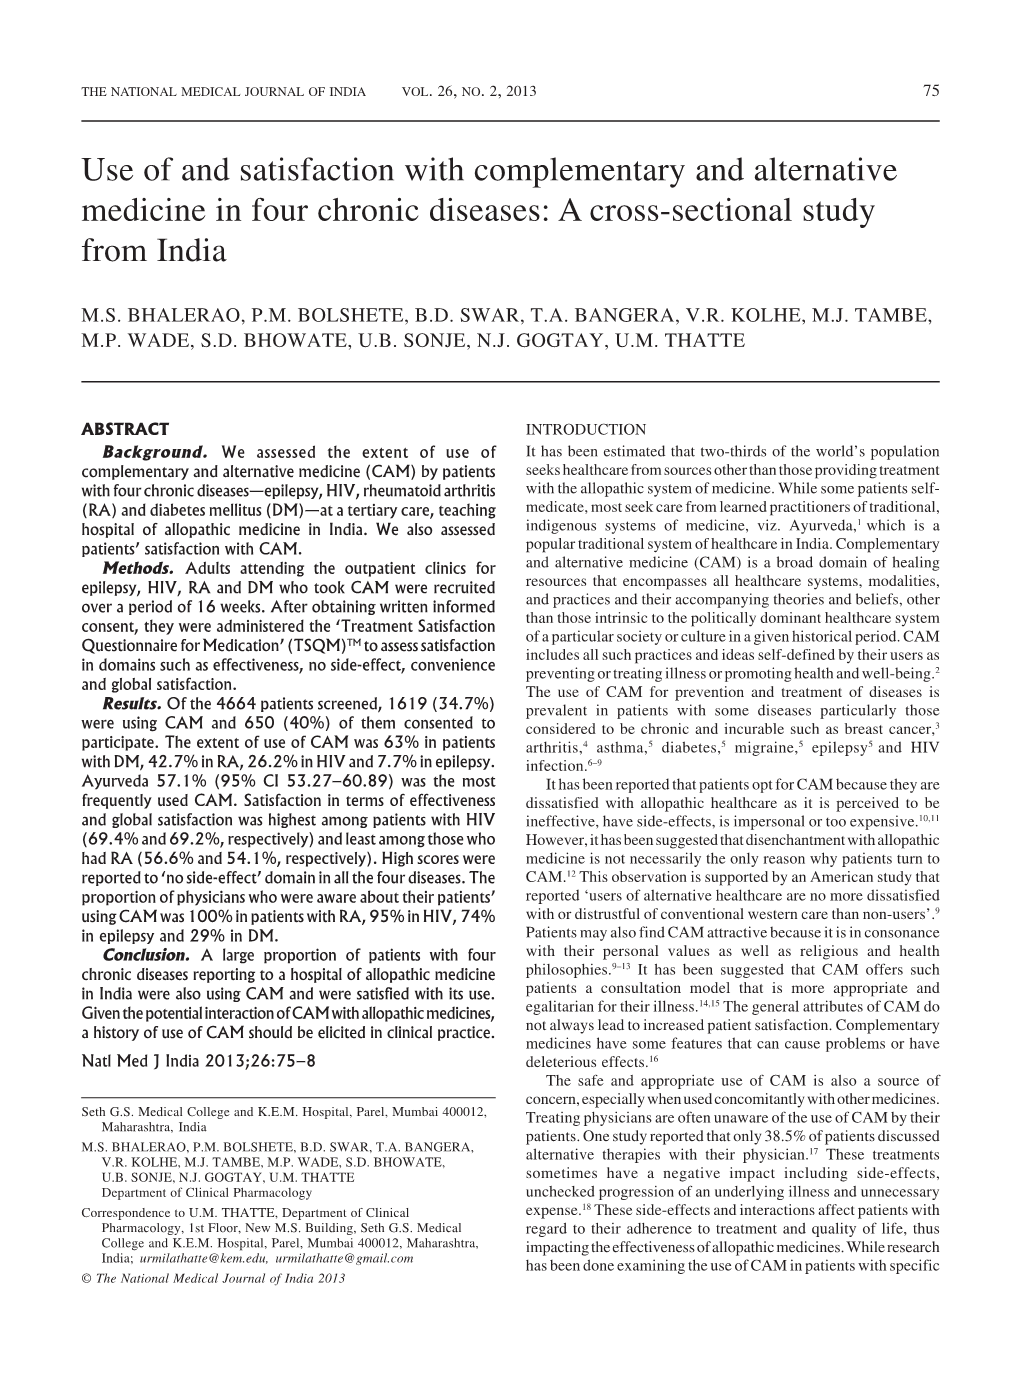 Use of and Satisfaction with Complementary and Alternative Medicine in Four Chronic Diseases: a Cross-Sectional Study from India